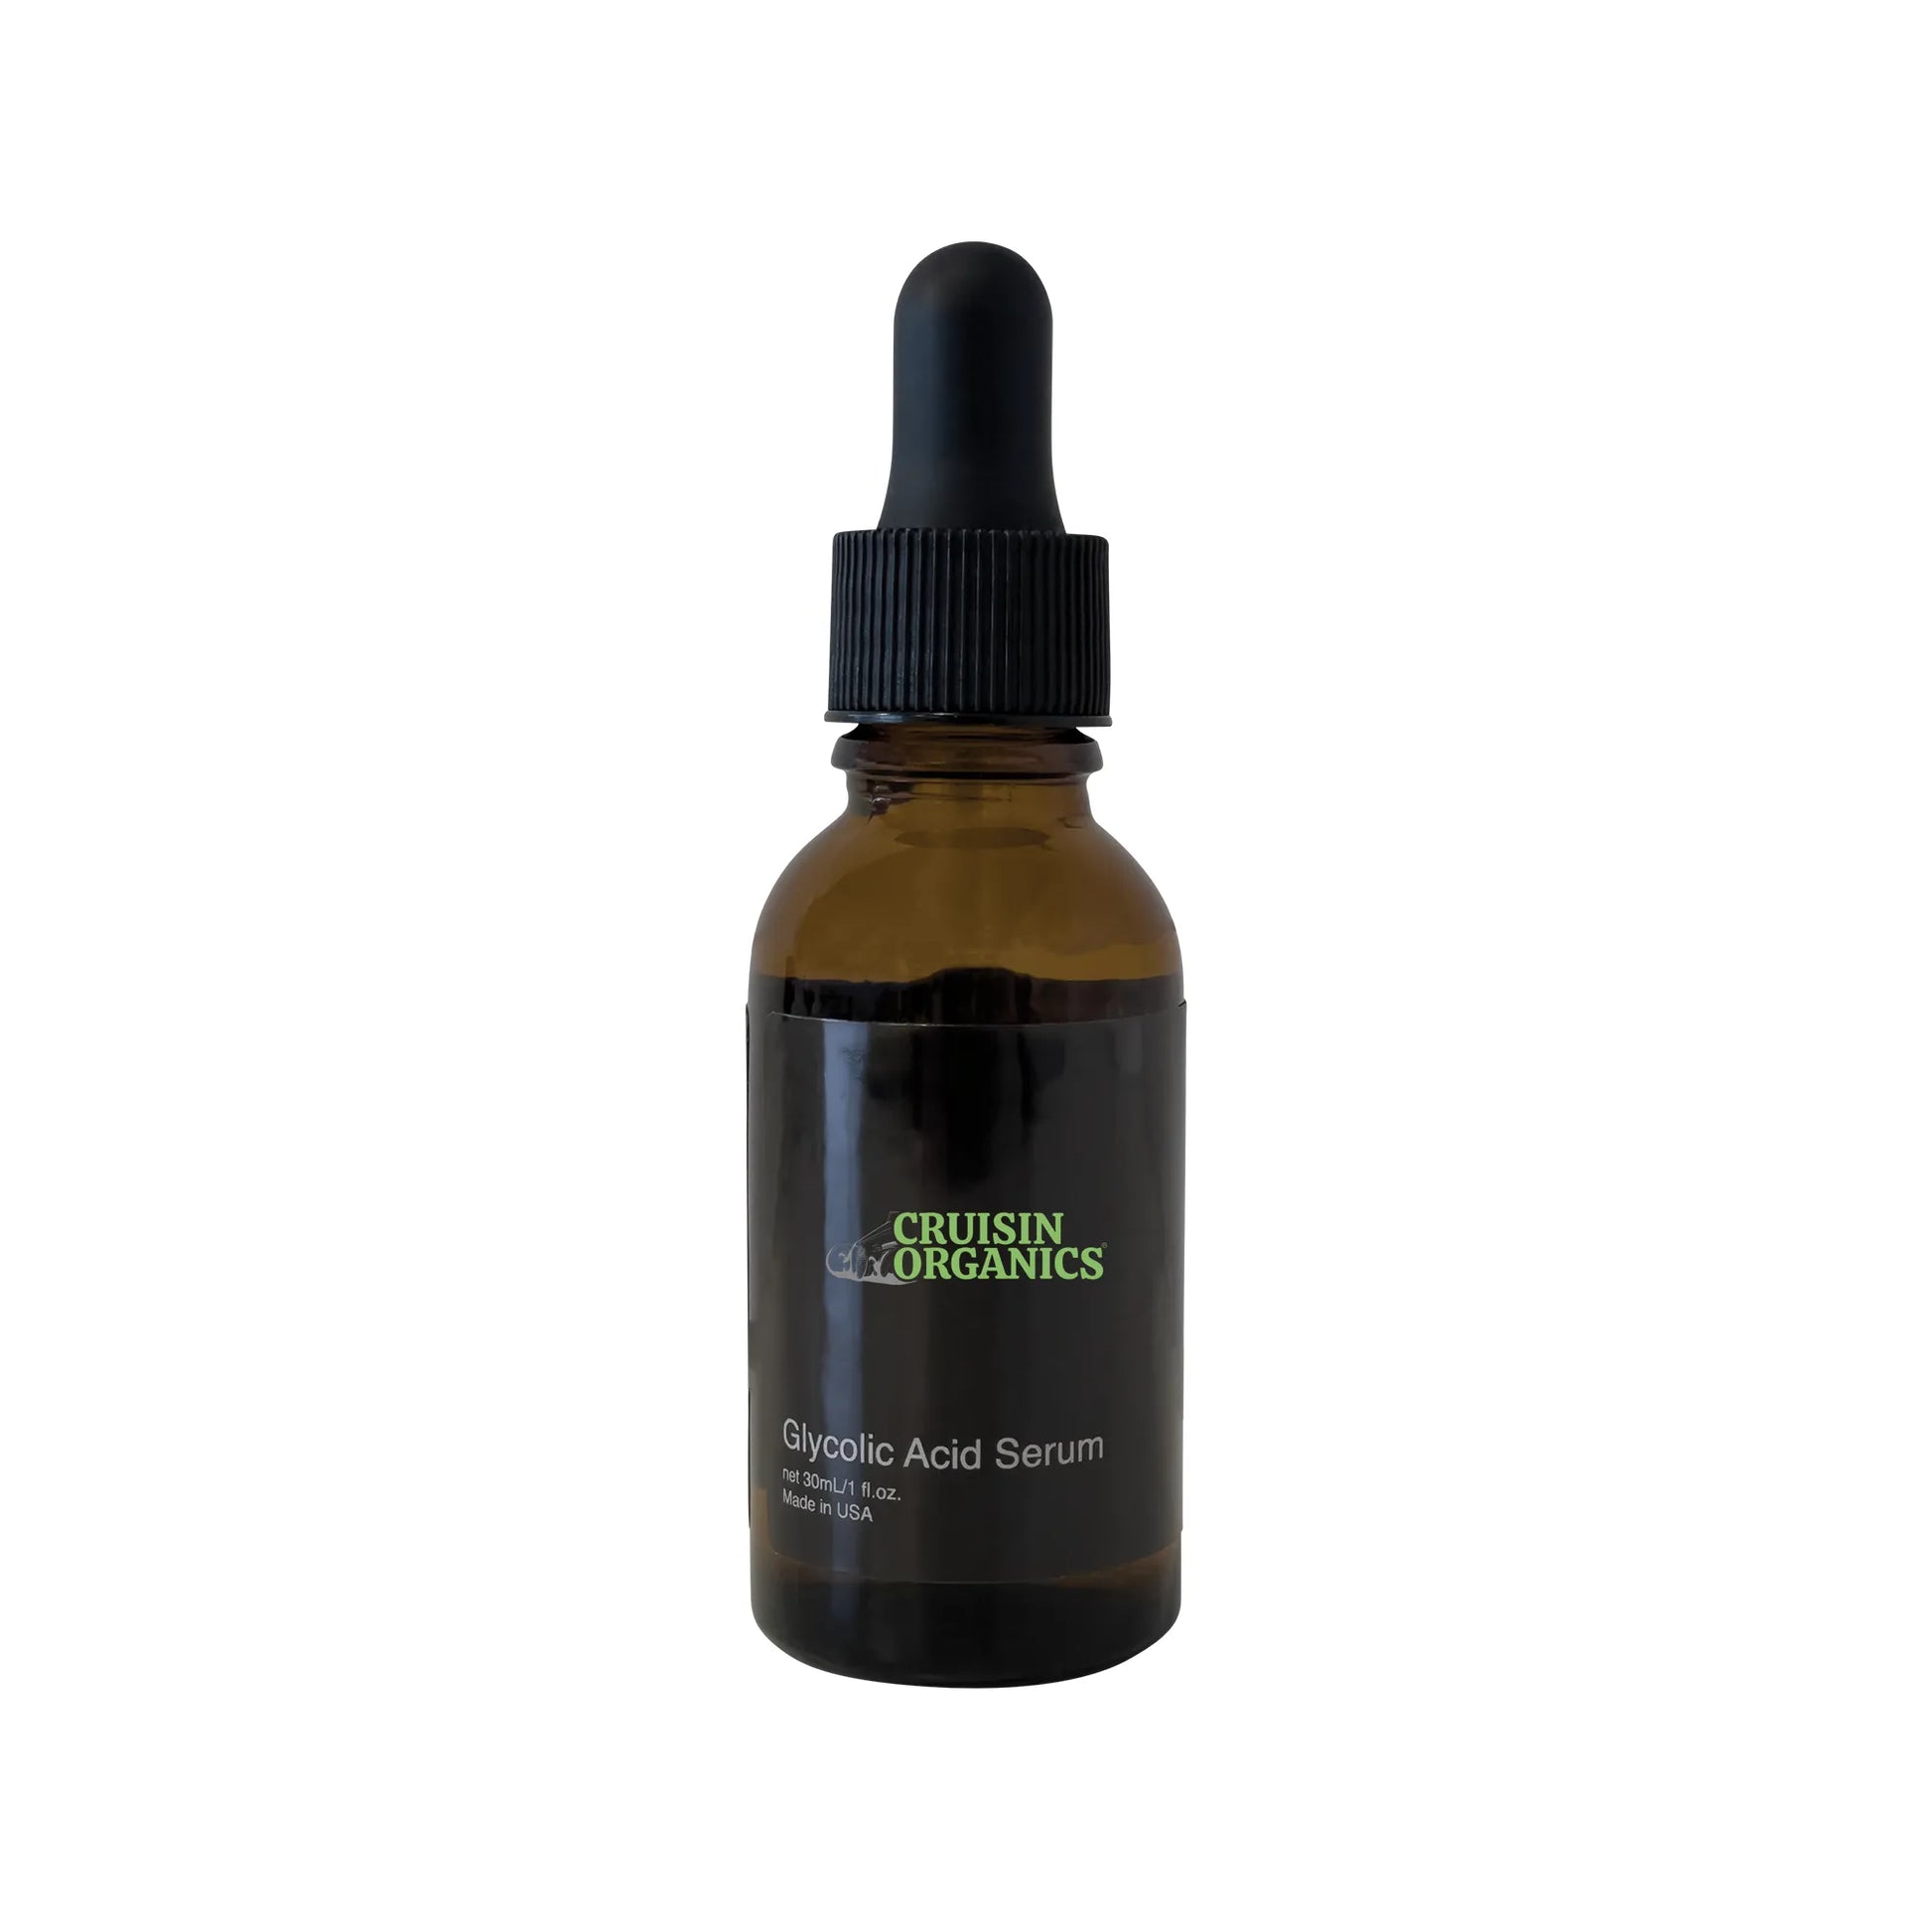 Cruisin Organics Glycolic Acid Serum. A gentle yet fast-acting exfoliant that evens hyperpigmentation, smooths skin tone, and refines texture. Contains glycerin for hydration, vitamin E for antioxidants, and squalane for moisture. Suitable for all skin types.